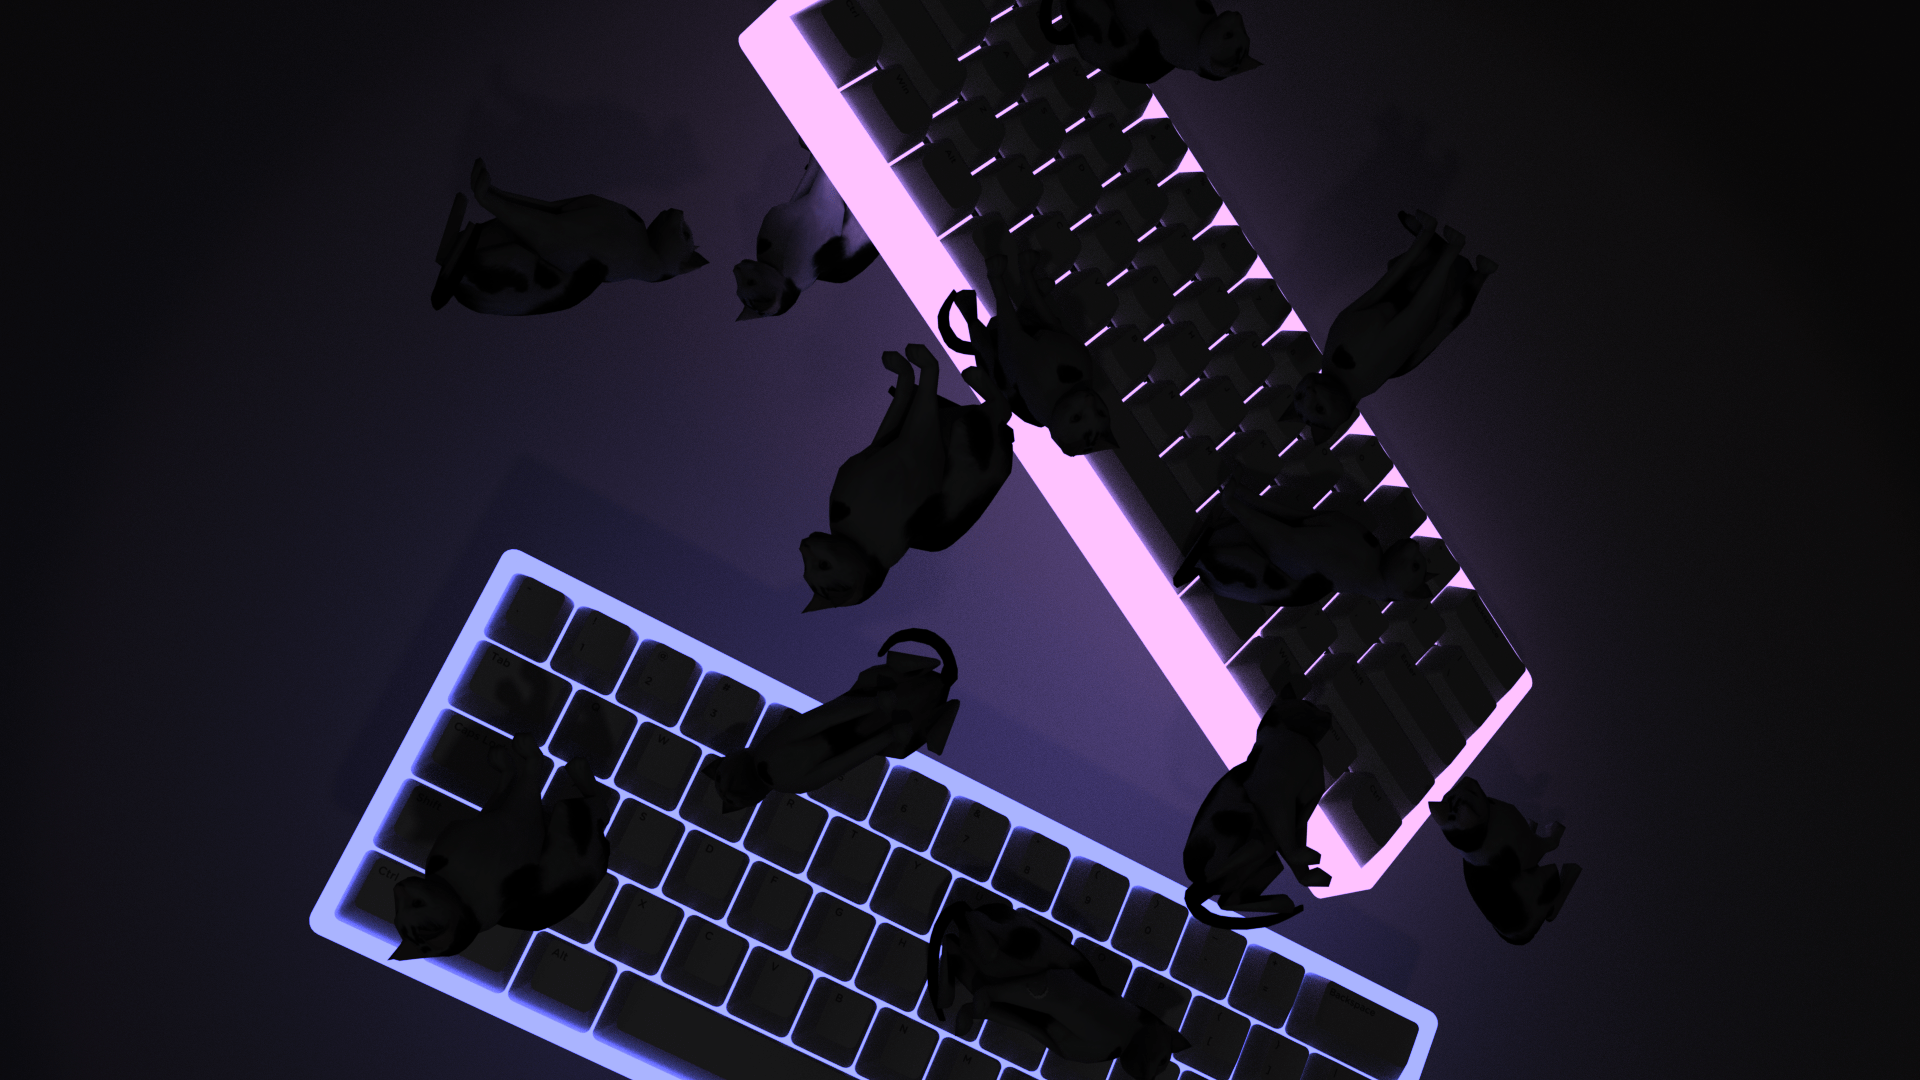 Free download 60 Keyboards falling with cats 4k aesthetic wallpaper [1920x1080] for your Desktop, Mobile & Tablet. Explore Aesthetic 4K Wallpaper. Aesthetic Wallpaper, Emo Aesthetic Wallpaper, Goth Aesthetic Wallpaper